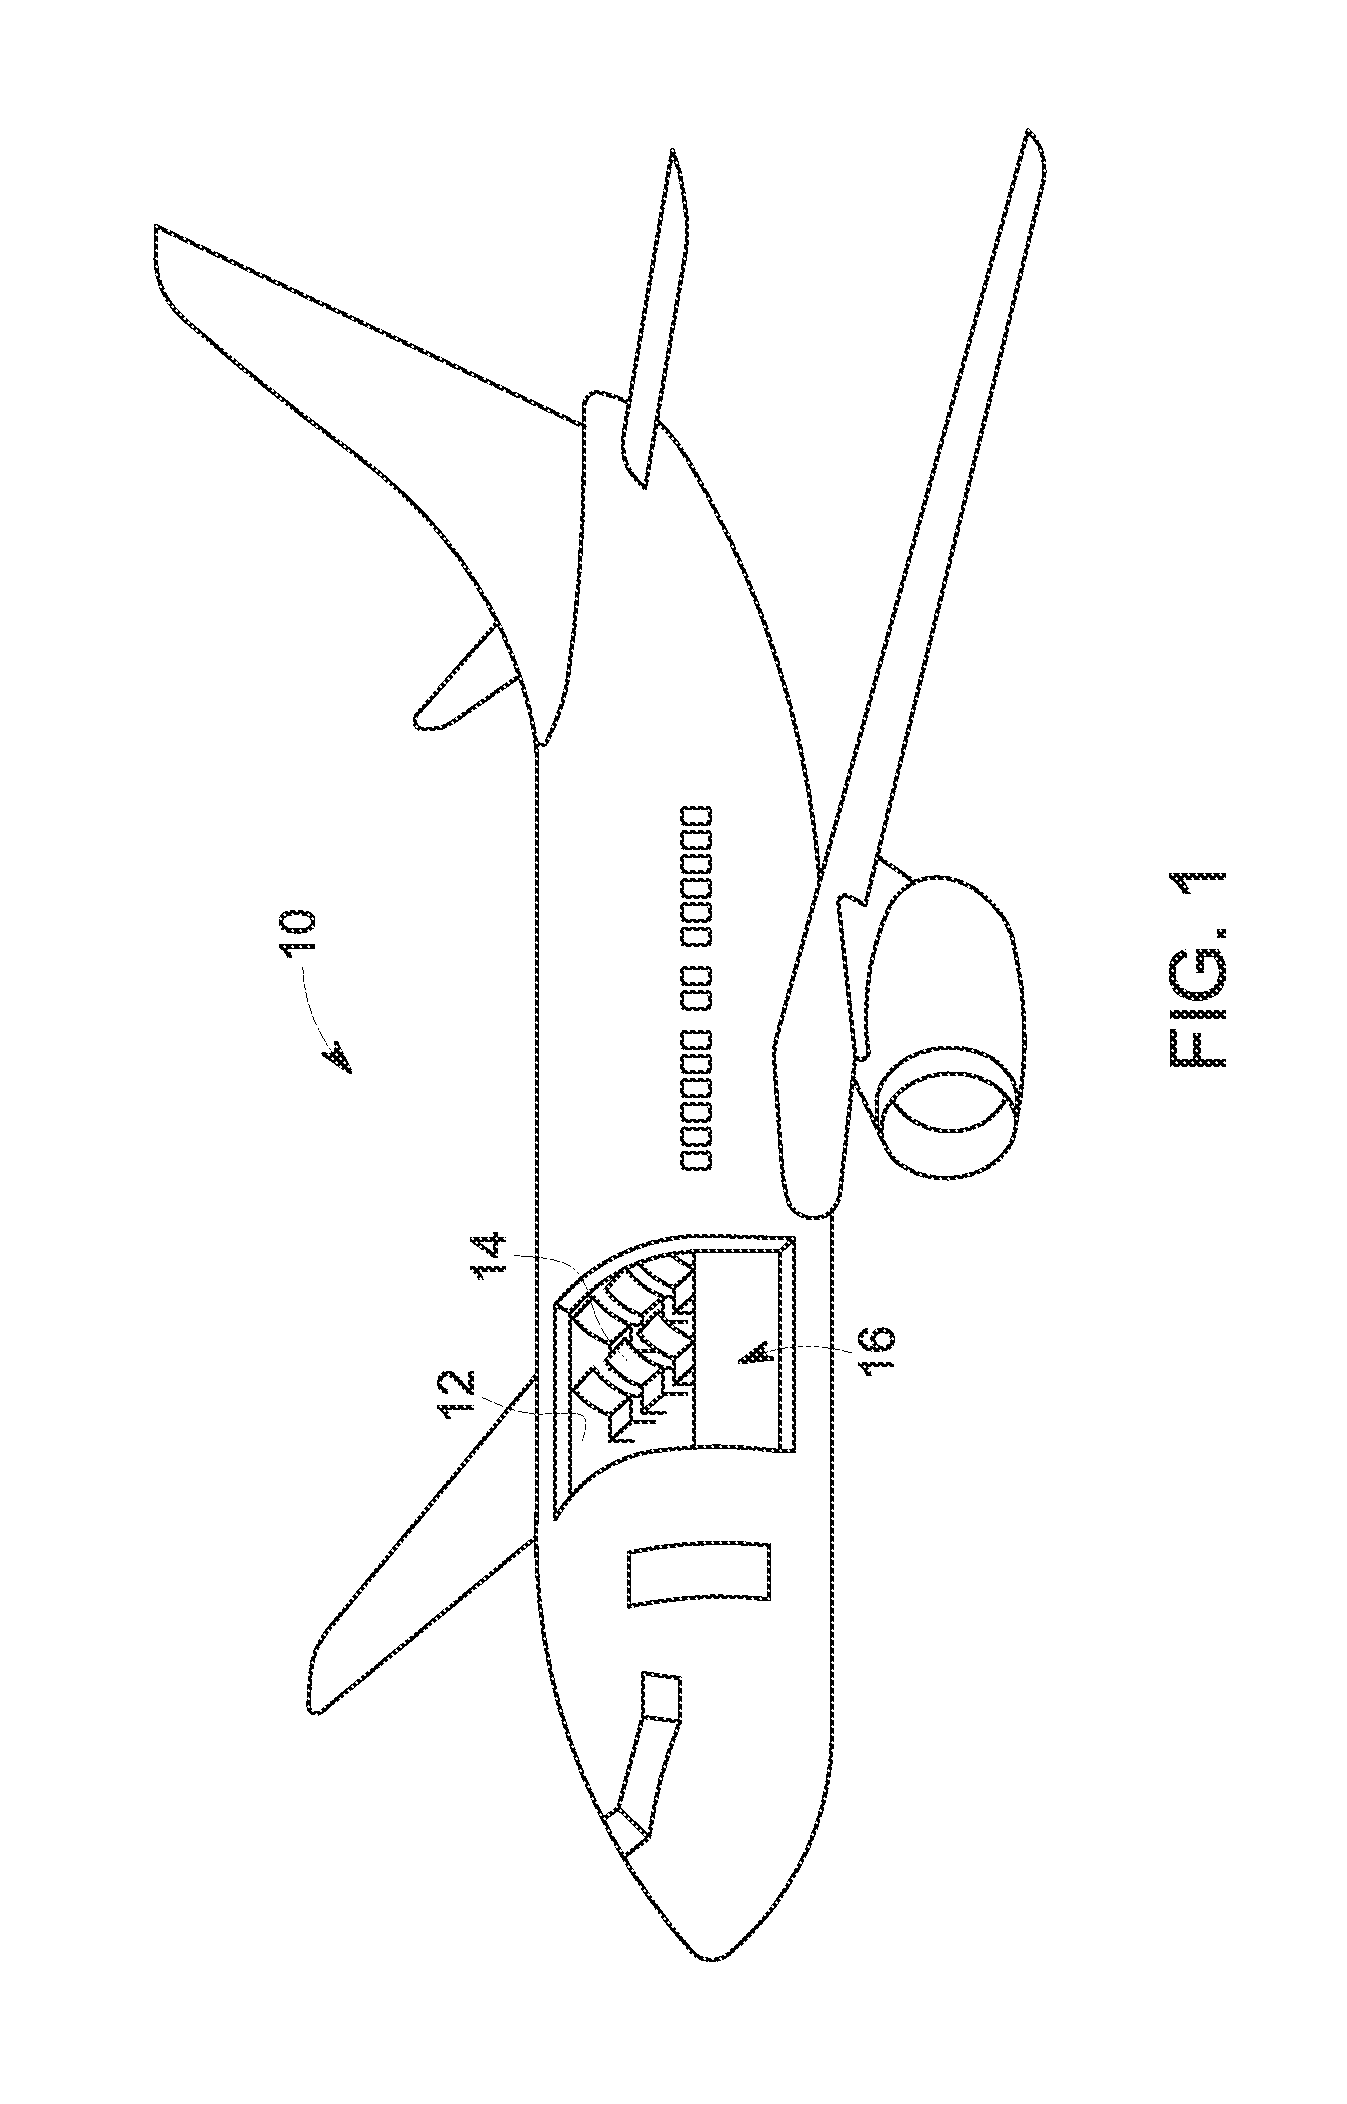 System and method for determining aircraft payloads to enhance profitability